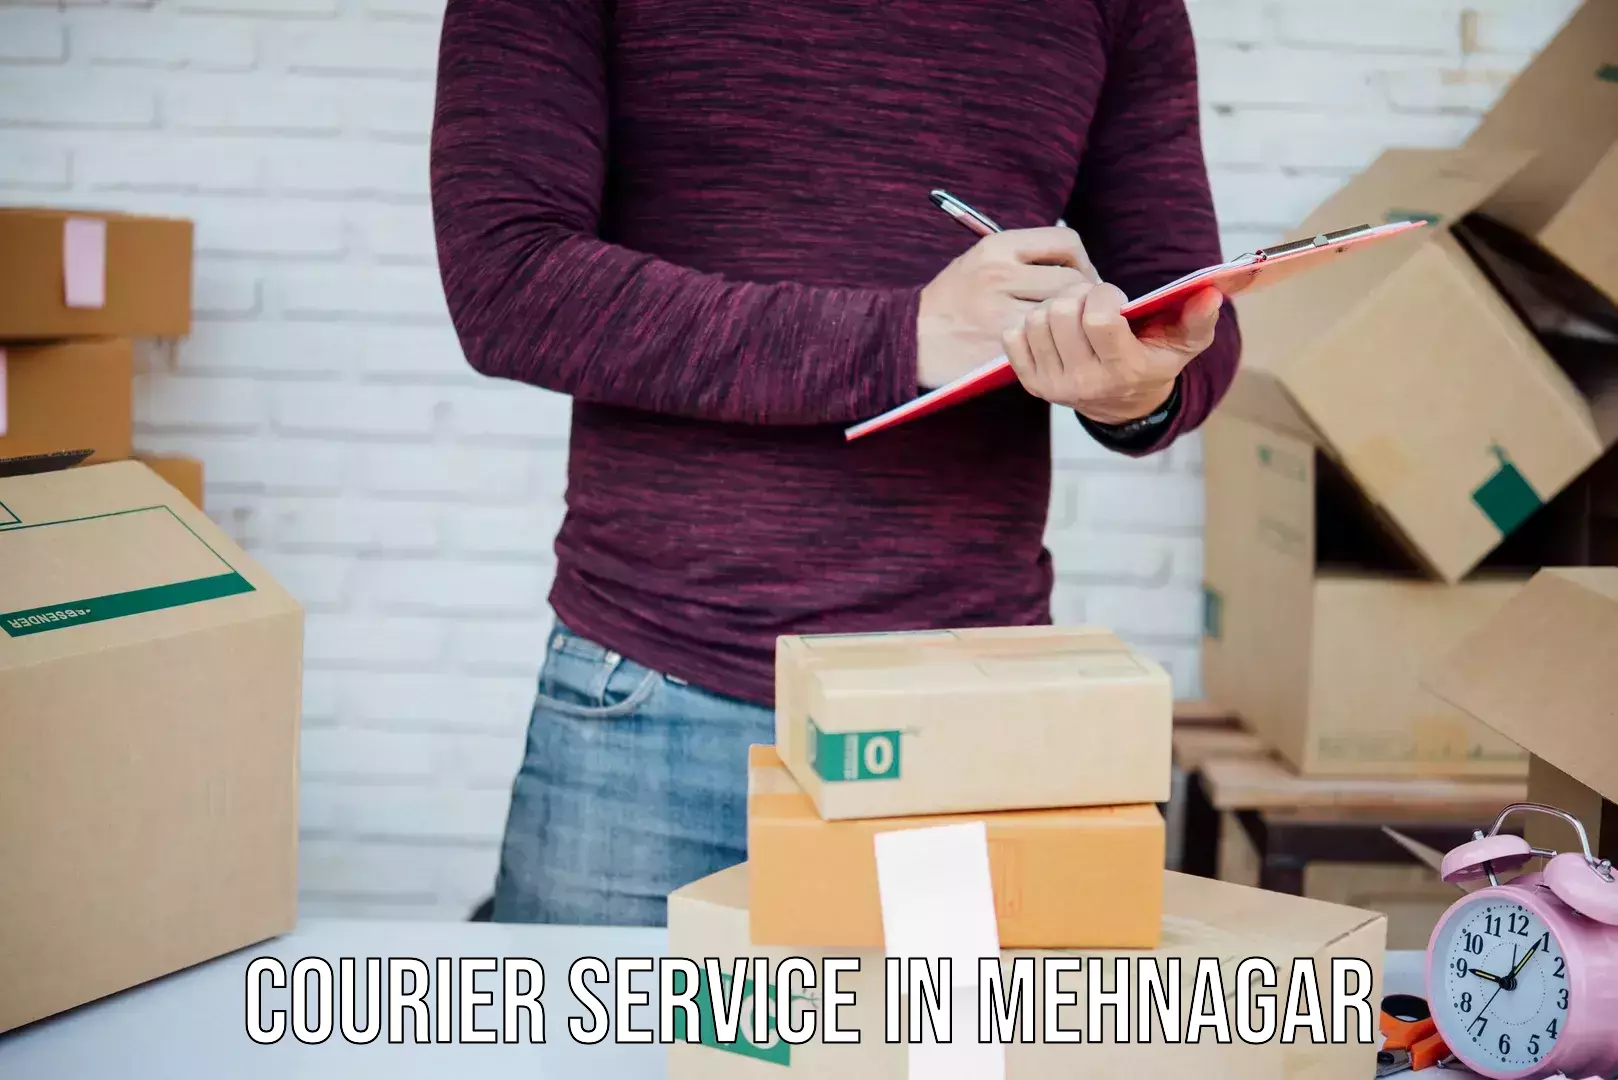 Advanced package delivery in Mehnagar